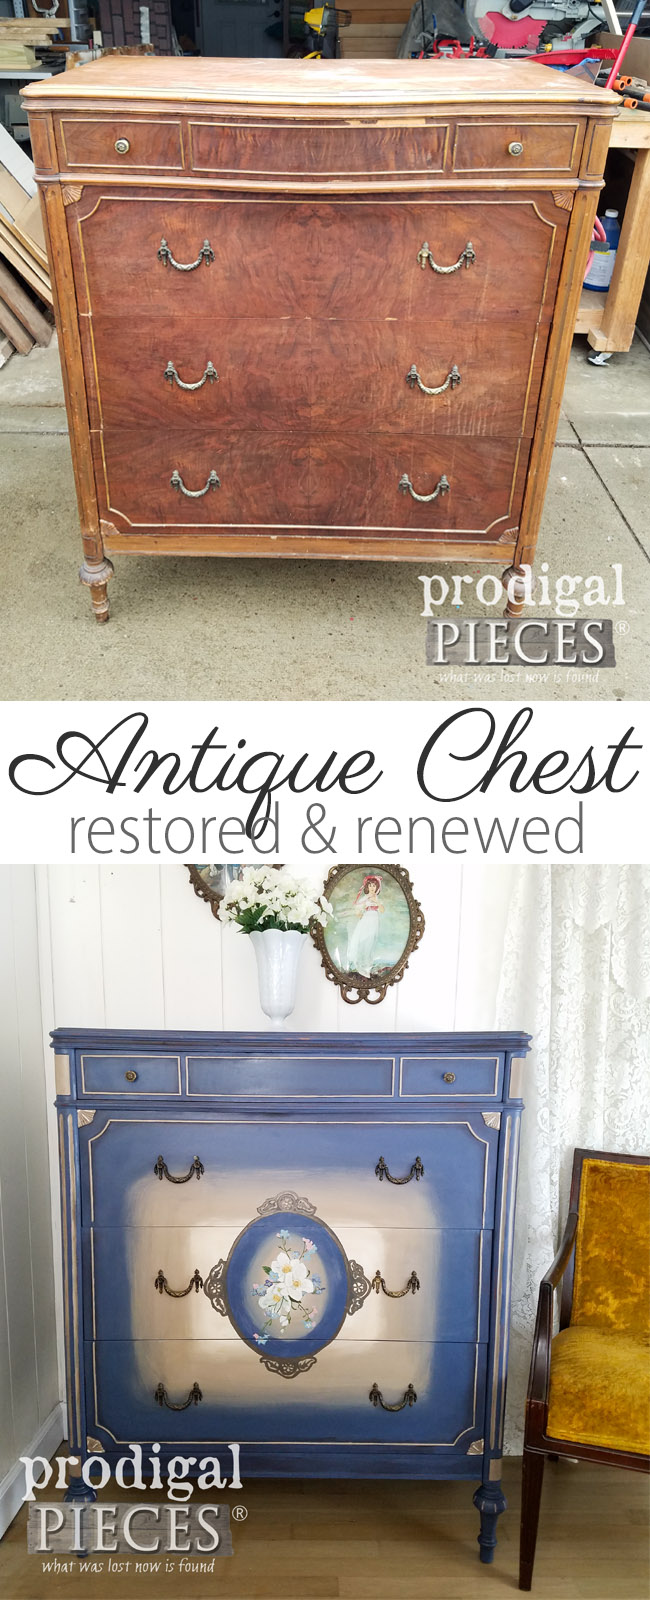 From worn and weary, this antique chest of drawers got the makeover of a lifetime. Hand-painted details and restoration techniques demonstrated by Larissa of Prodigal Pieces | prodigalpieces.com